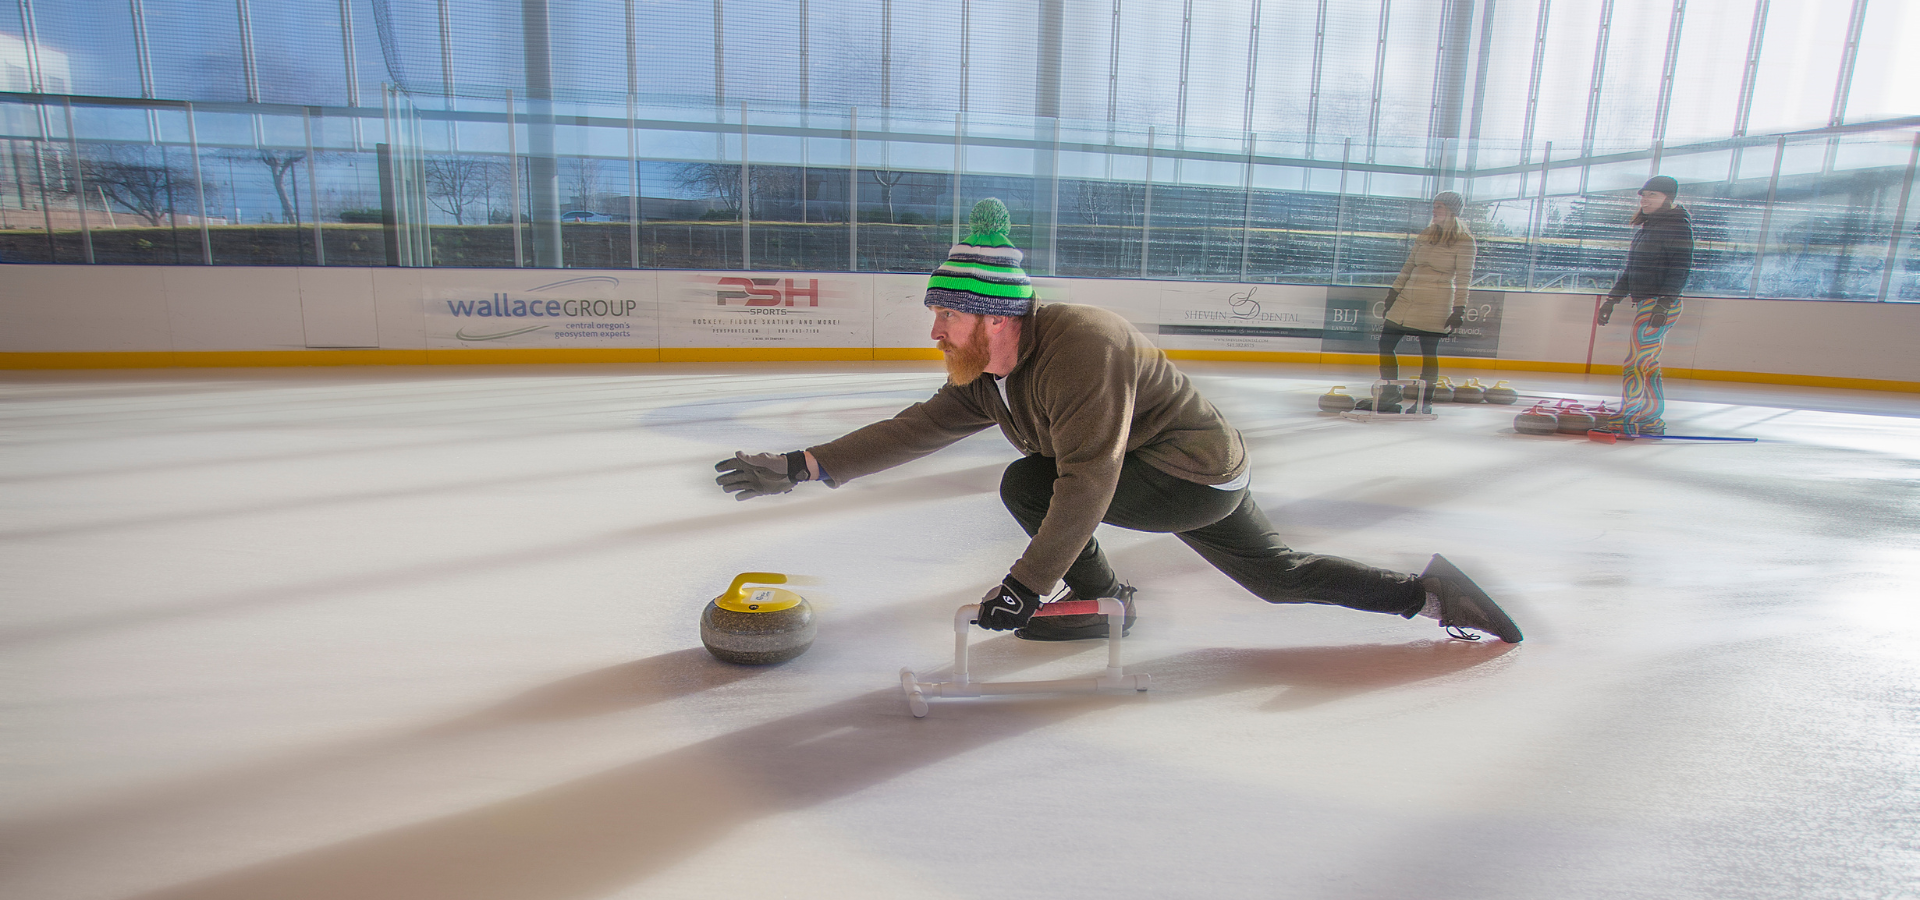 At the Pavilion, a curling player throws their stone across the ice.